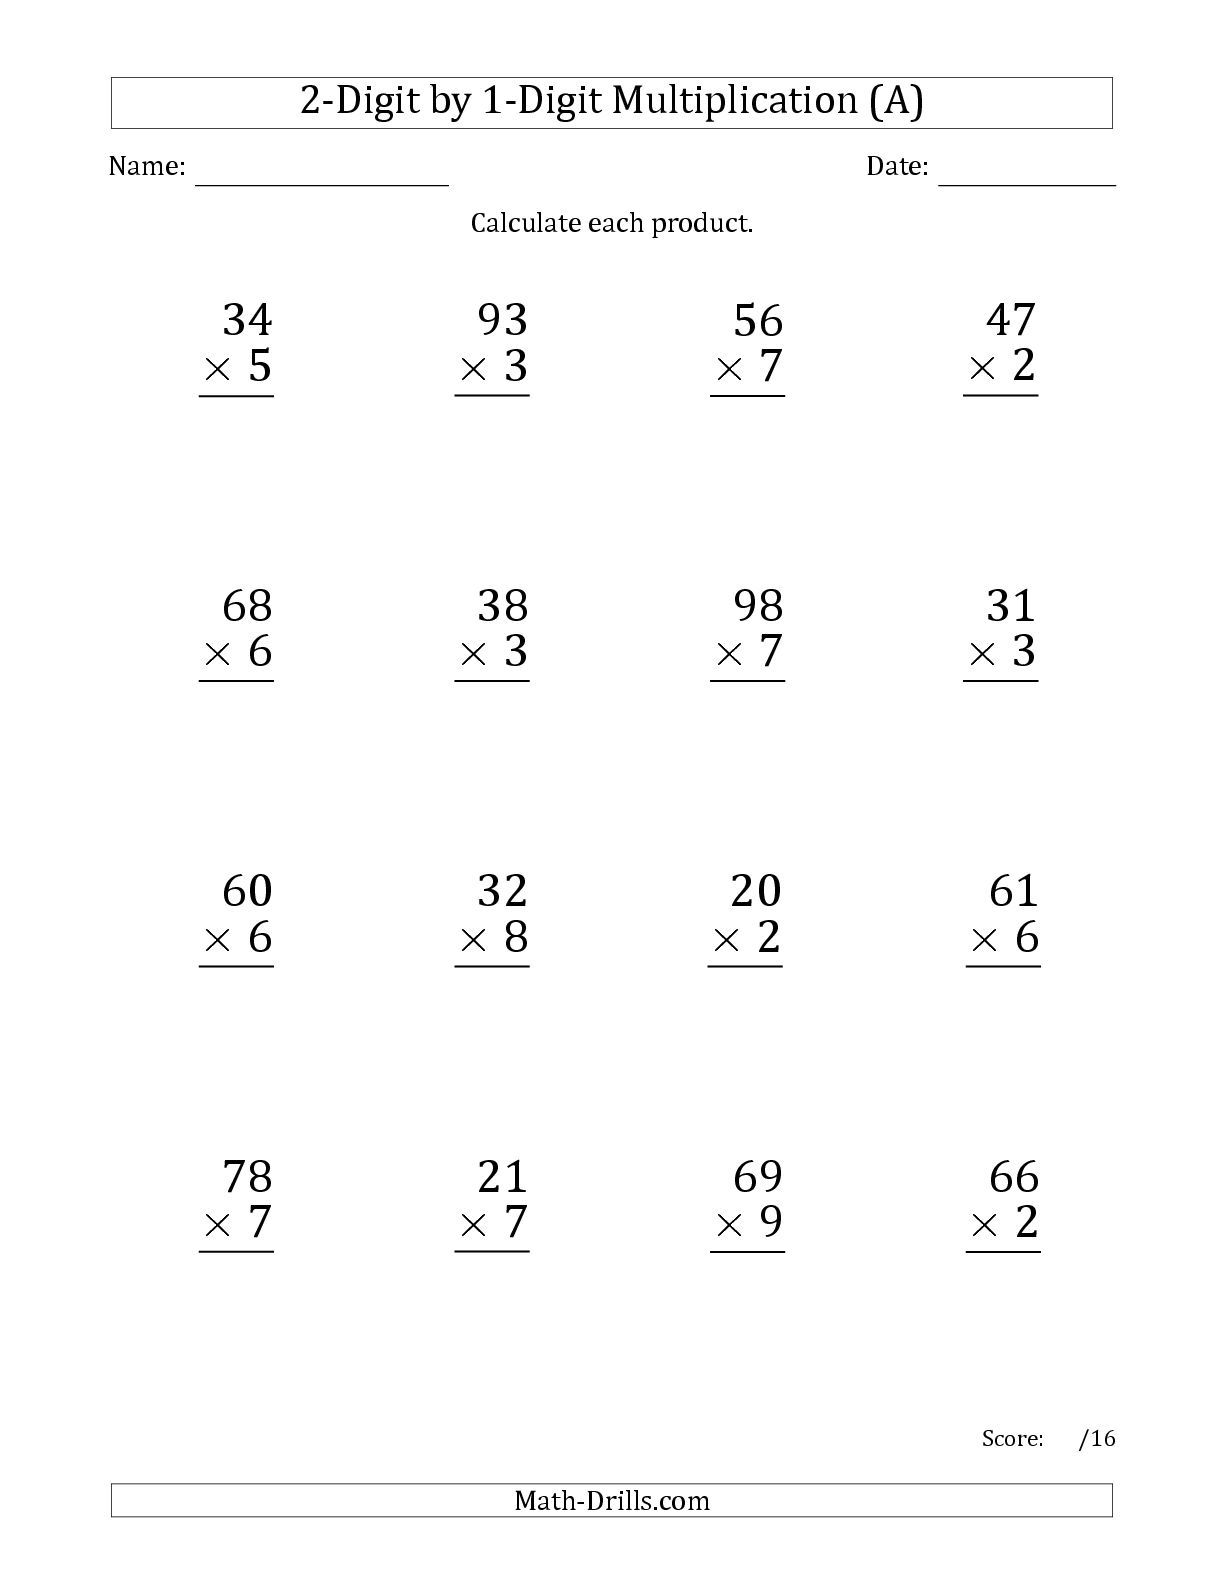 The Multiplying 2Digit by 1Digit Numbers (Large Print) (A) math